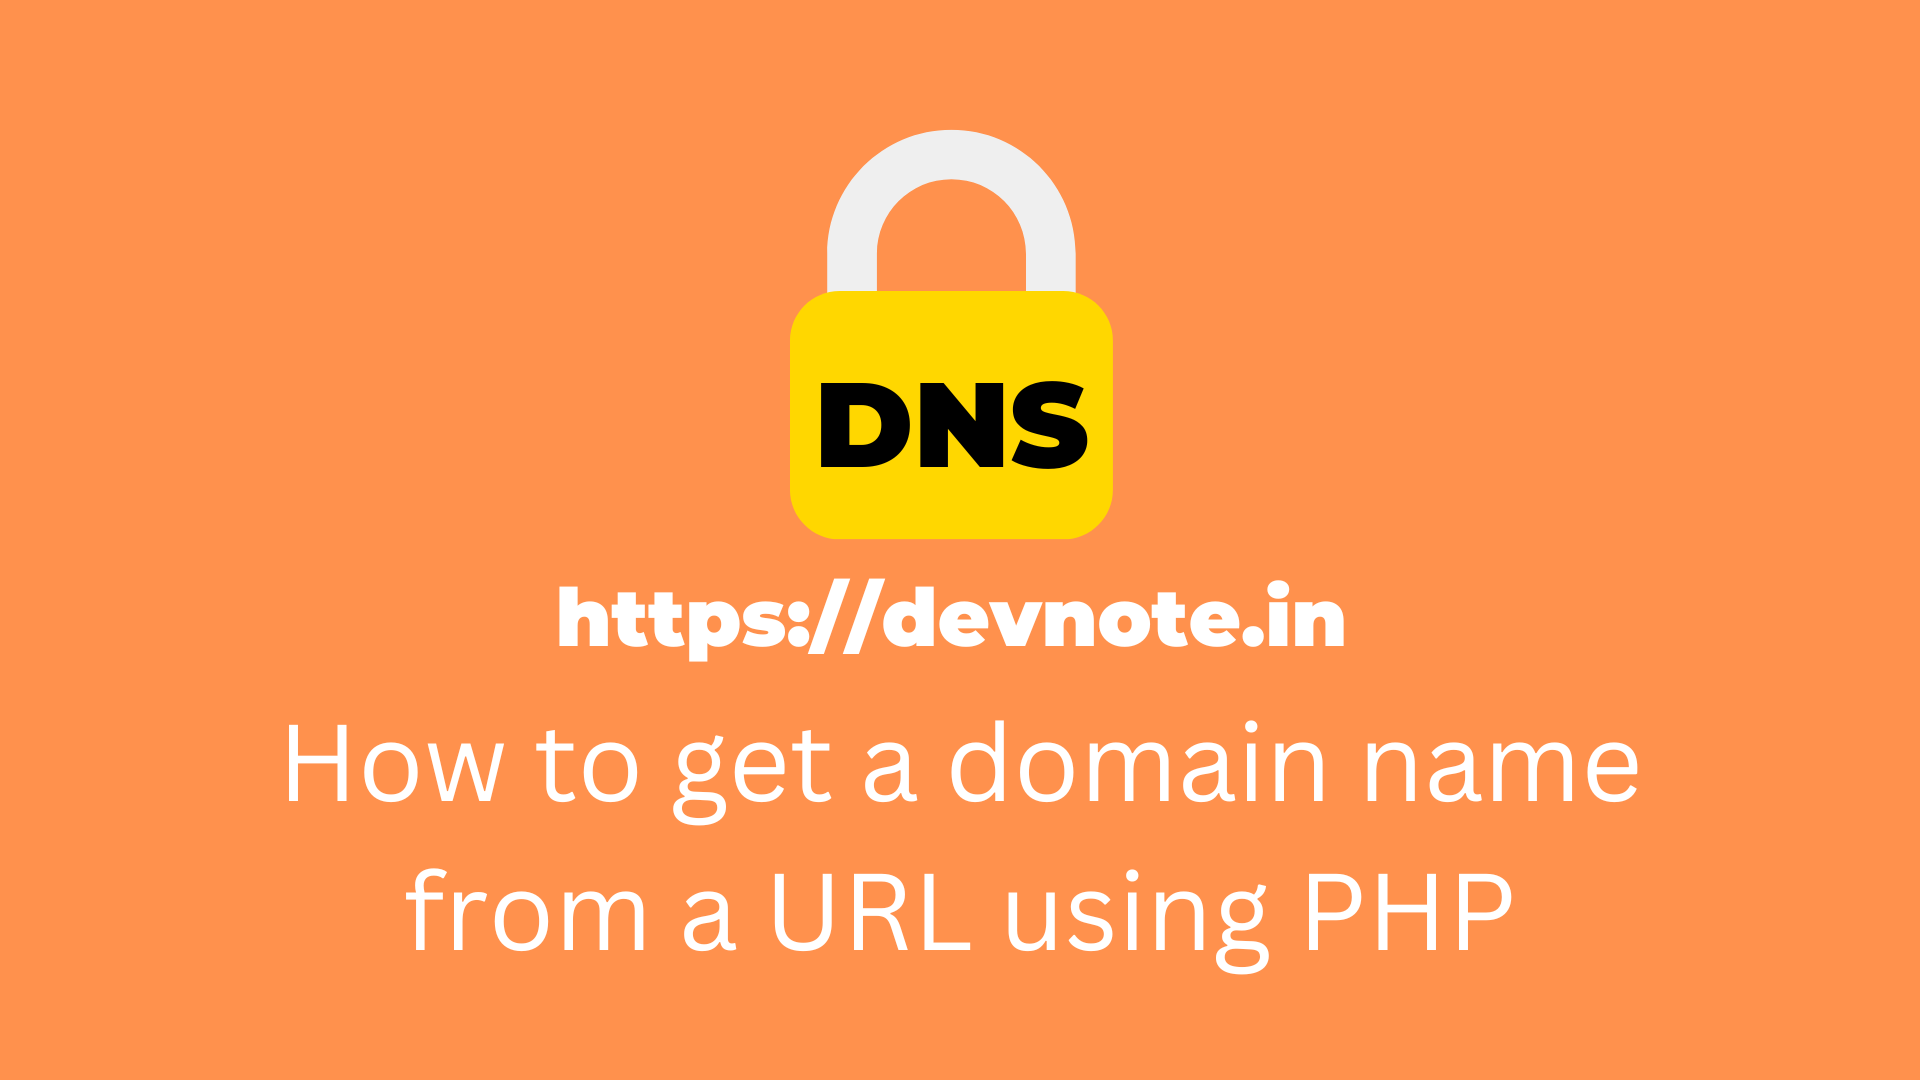 How to get a domain name from a URL using PHP